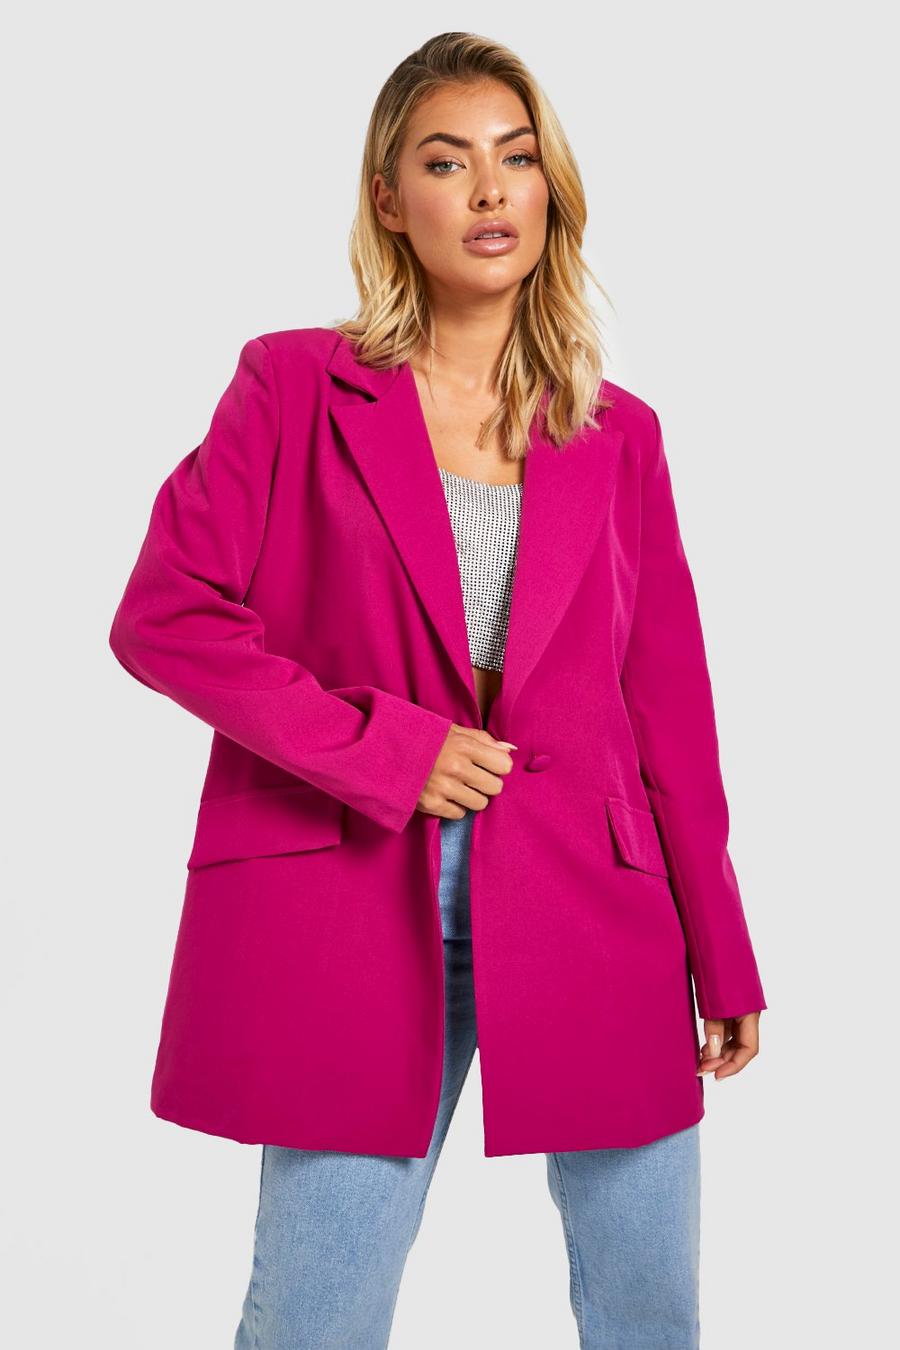 Magenta pink Color Pop Relaxed Fit Tailored Blazer image number 1